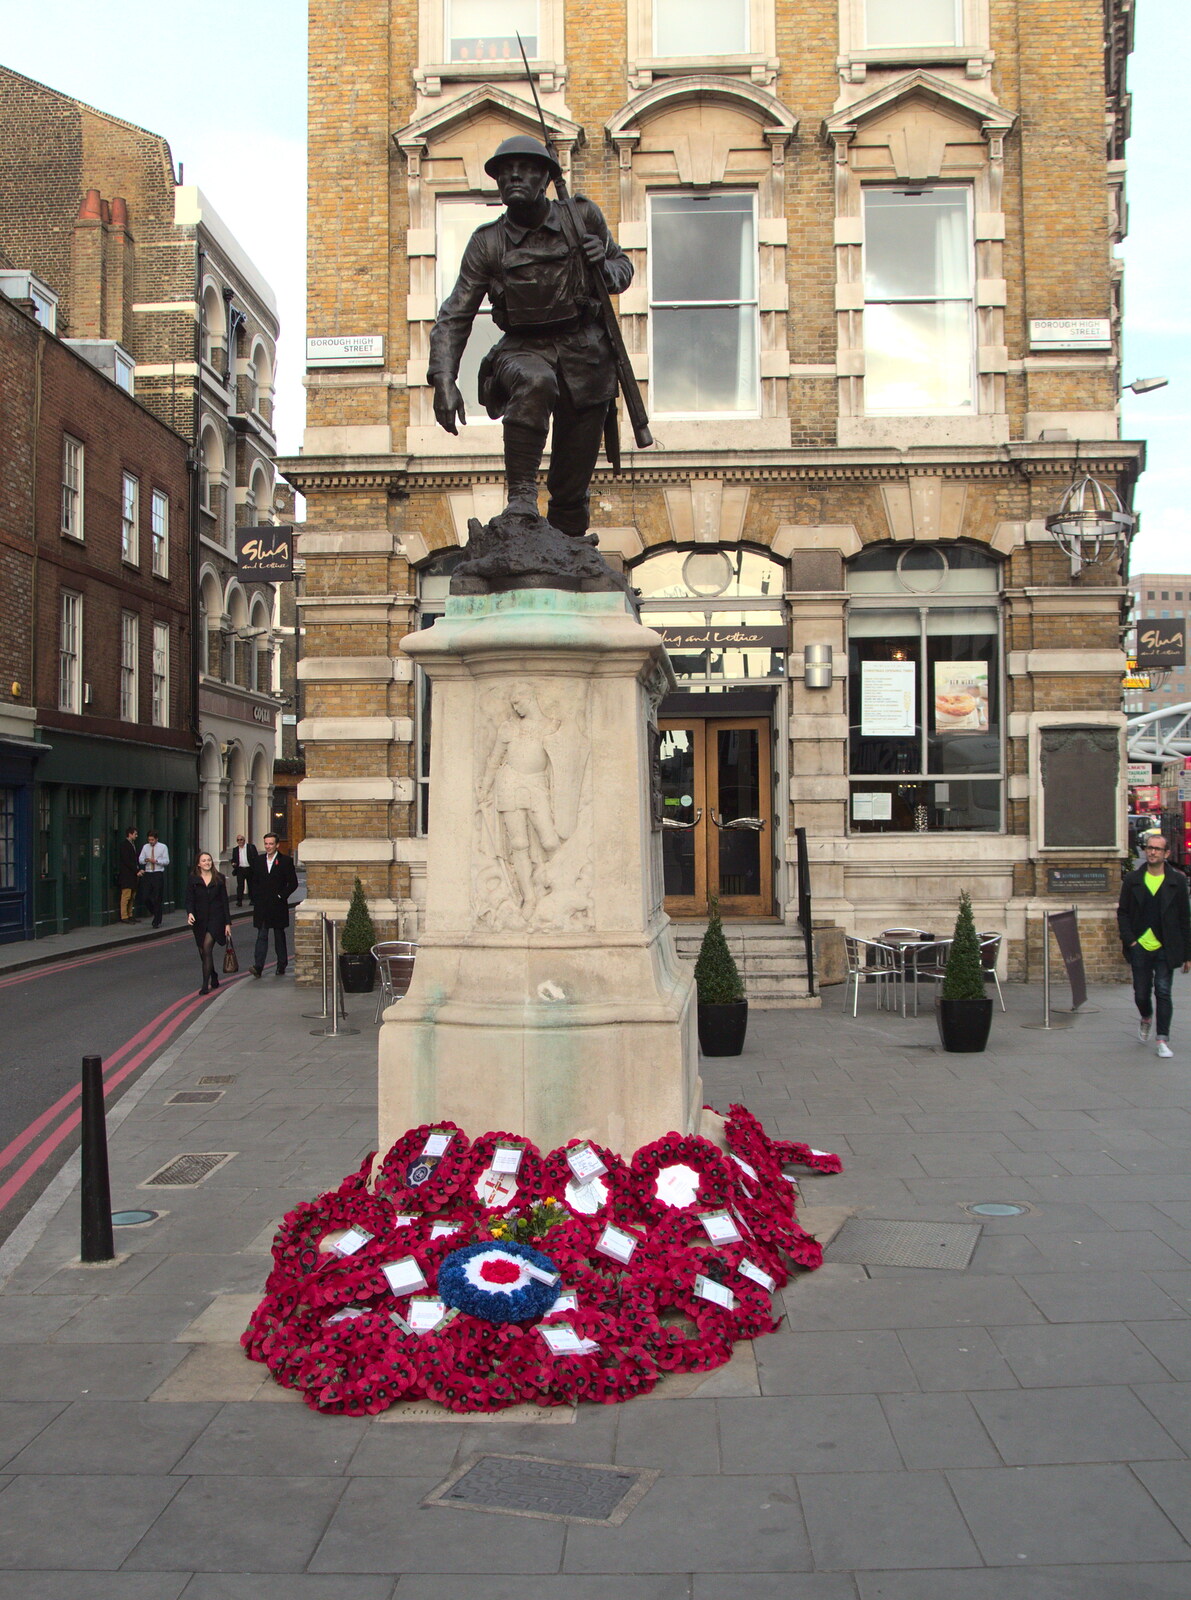 War memorial on Borough High Street from A Melting House Made of Wax, Southwark, London - 12th November 2014